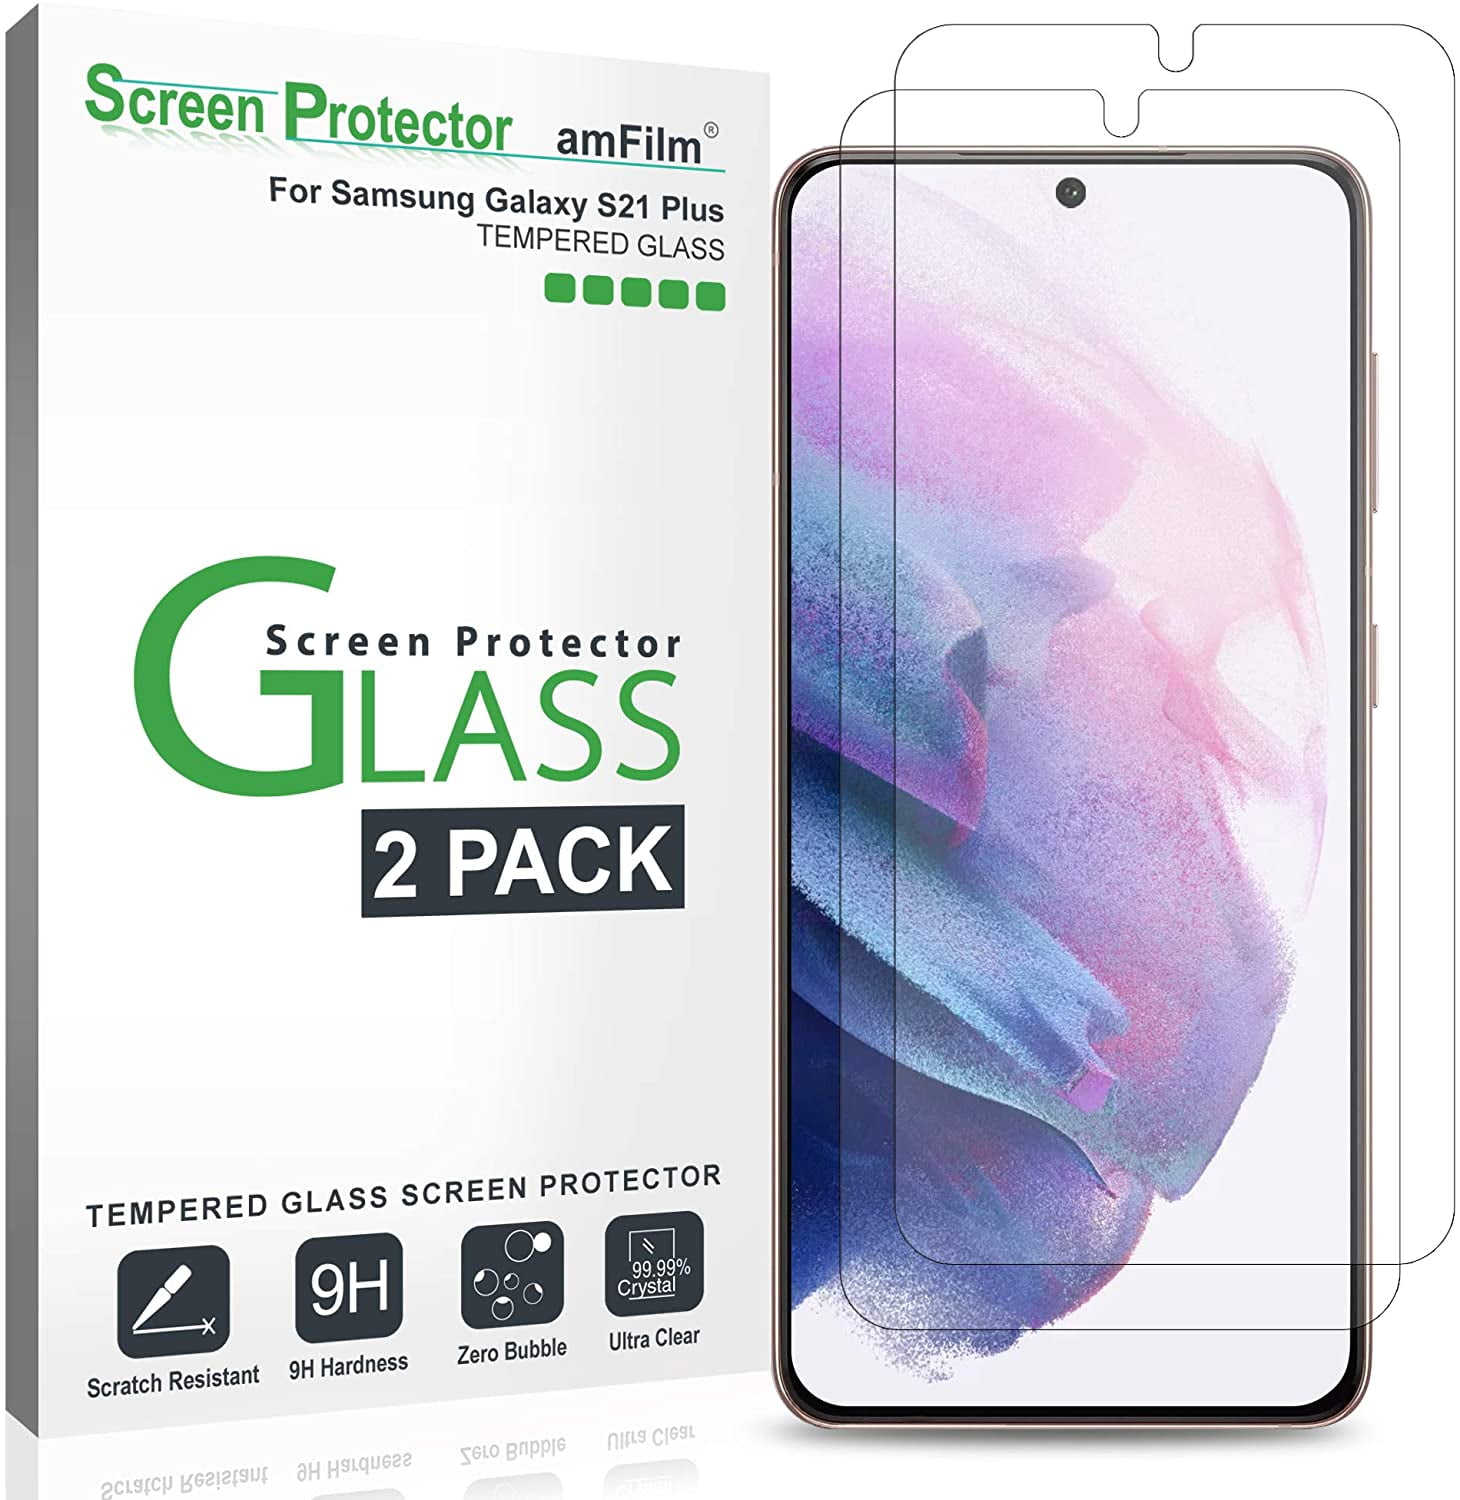 S21 Tempered Glass Screen Protector for Samsung Galaxy S21 Plus Fingerprint Compatible 9H Hardness Anti-glare Bubble Free Case Friendly Alignment Frame Easy Installation 5G 6.7 Inch 2 + 2 